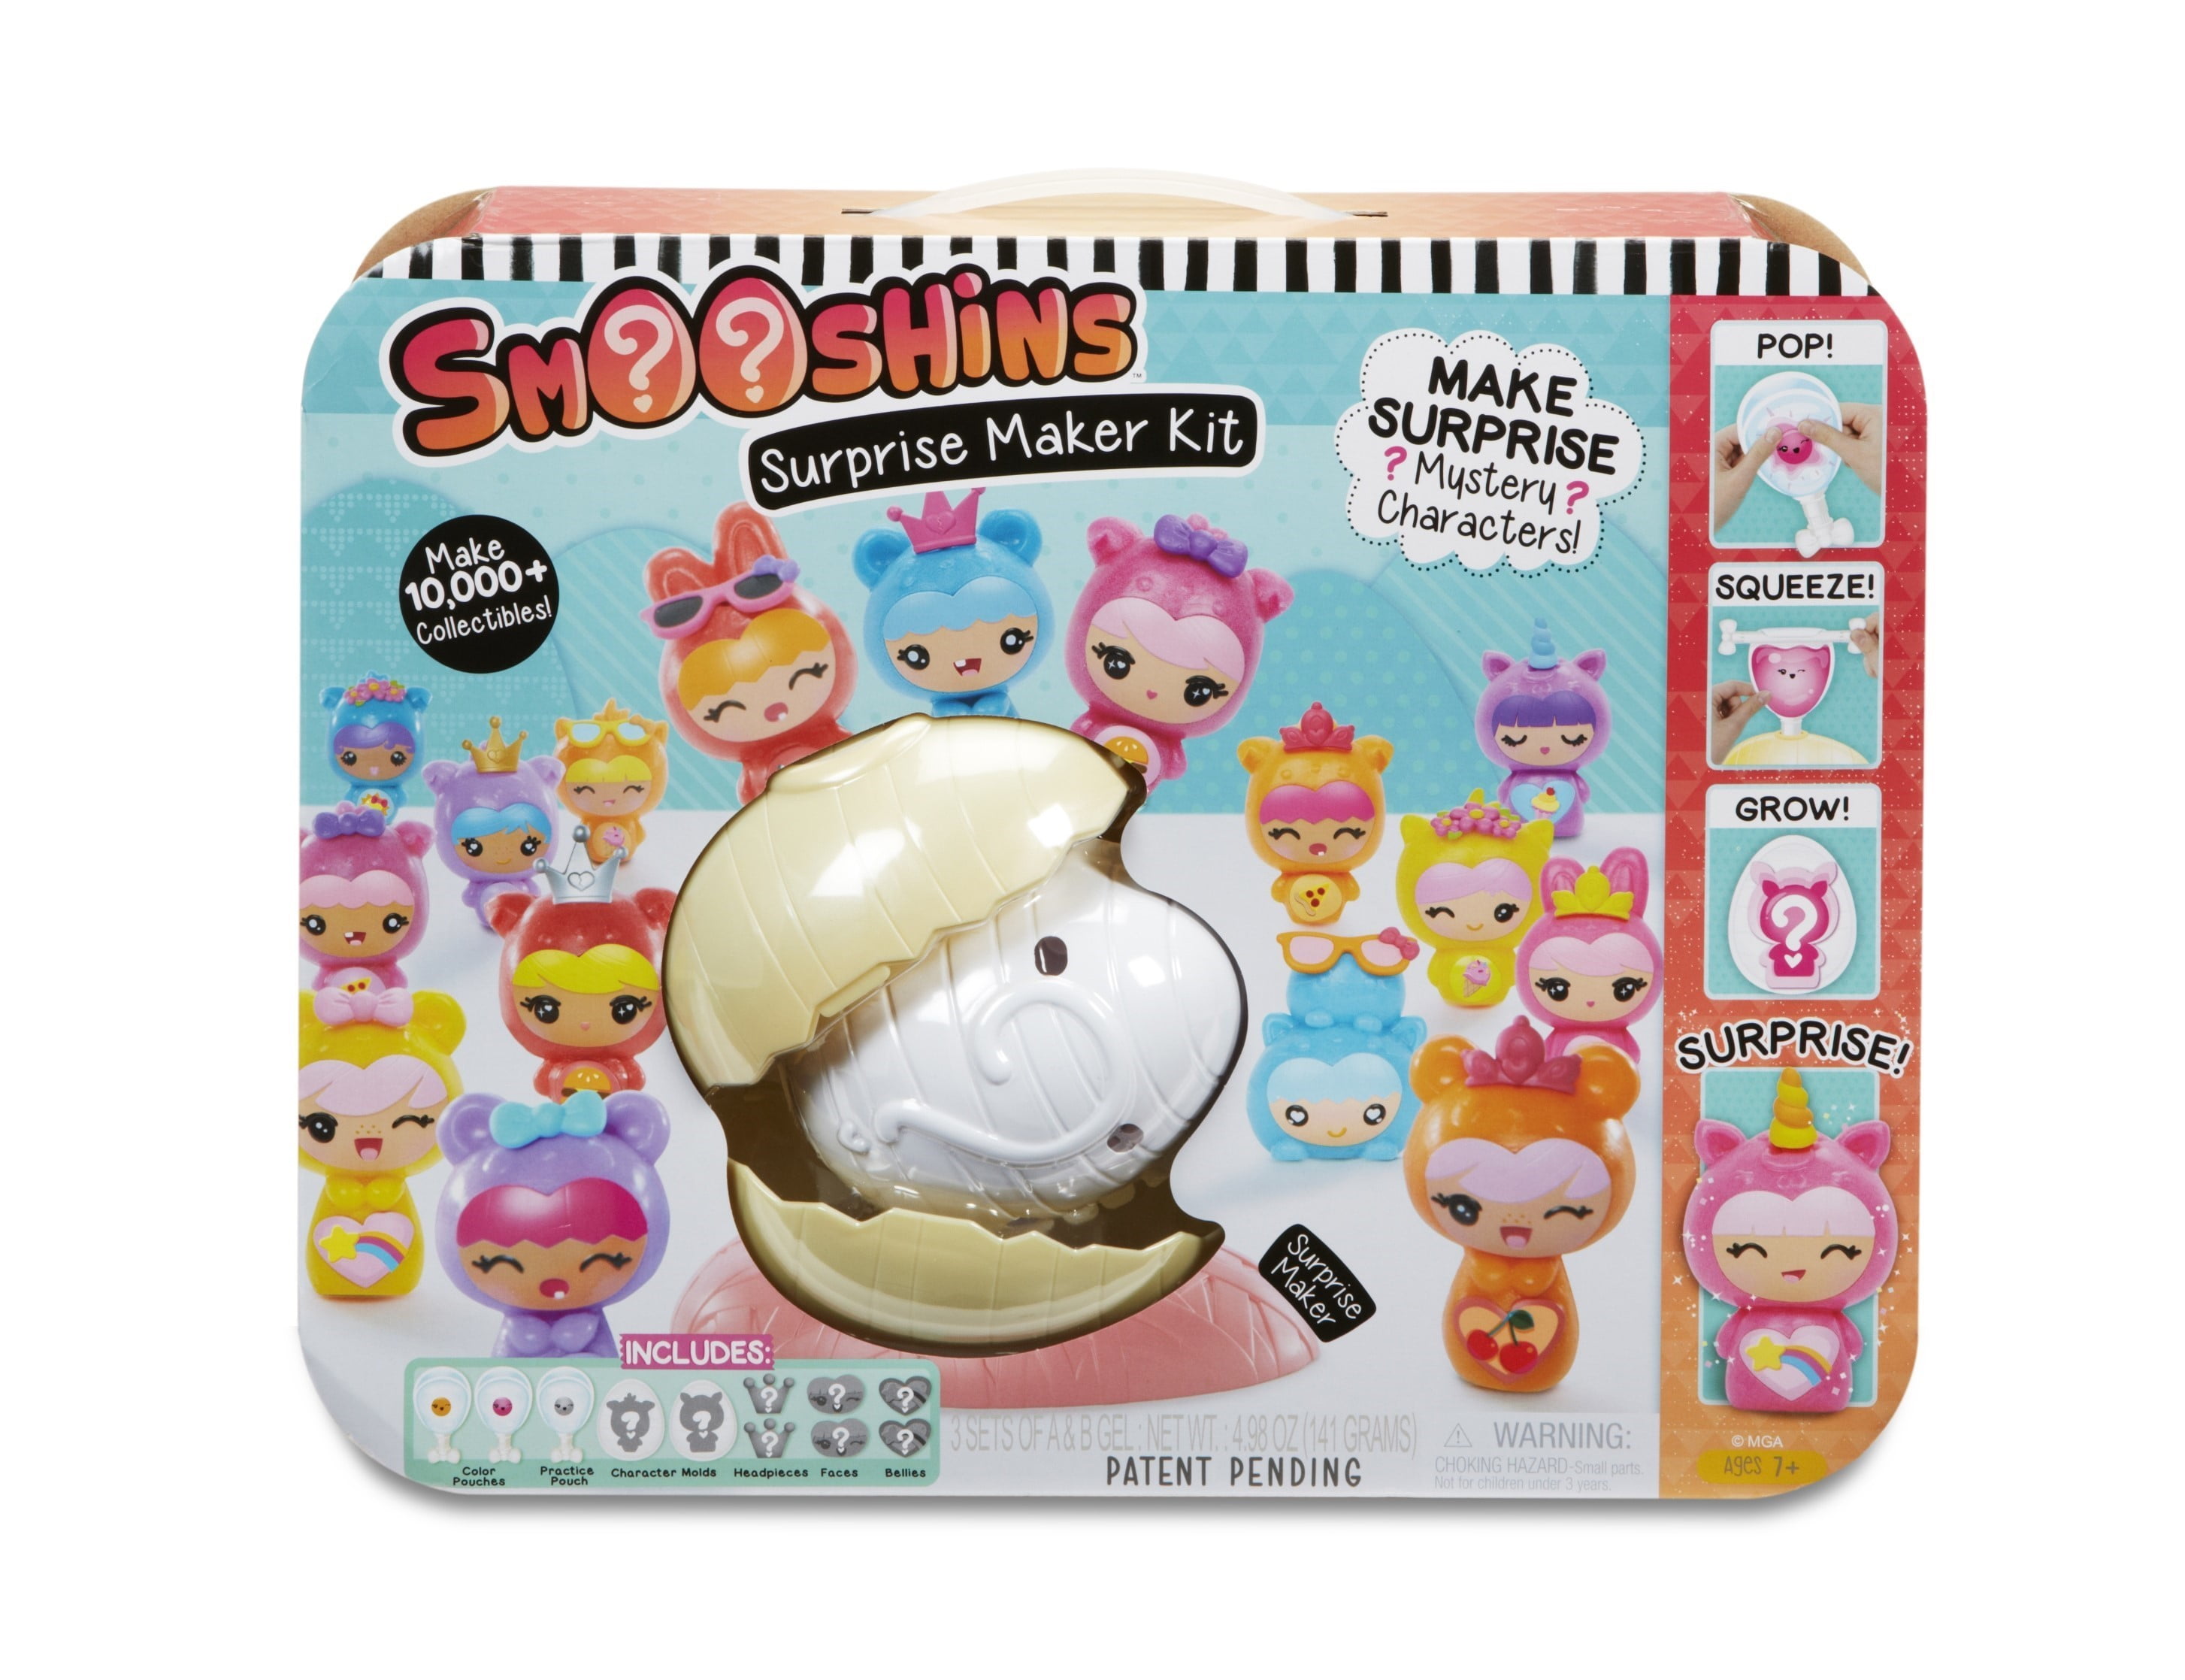 Shopkins: The holiday toy craze to prepare for